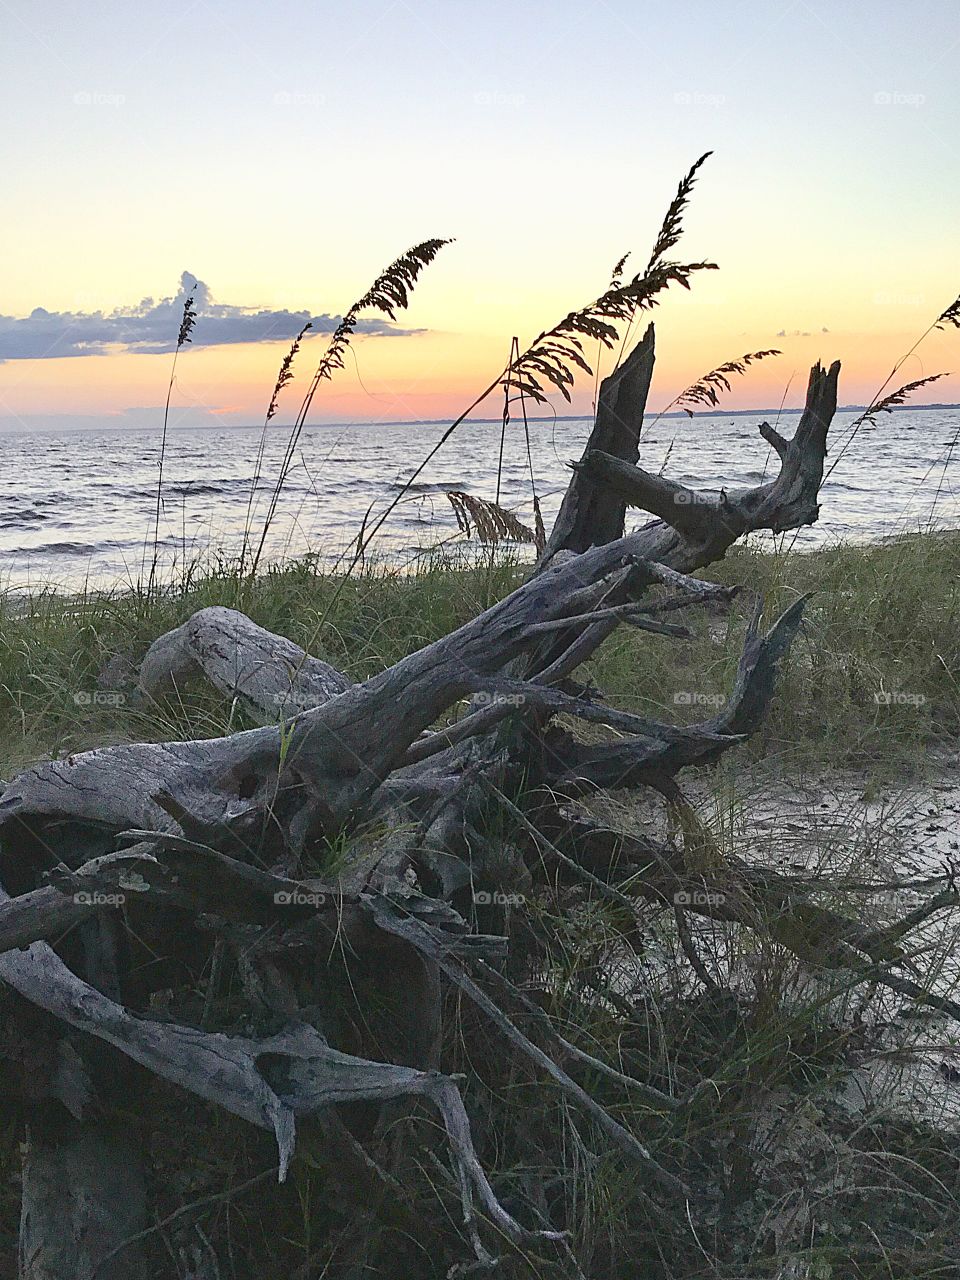 Tree stump and sea oats against the sunset